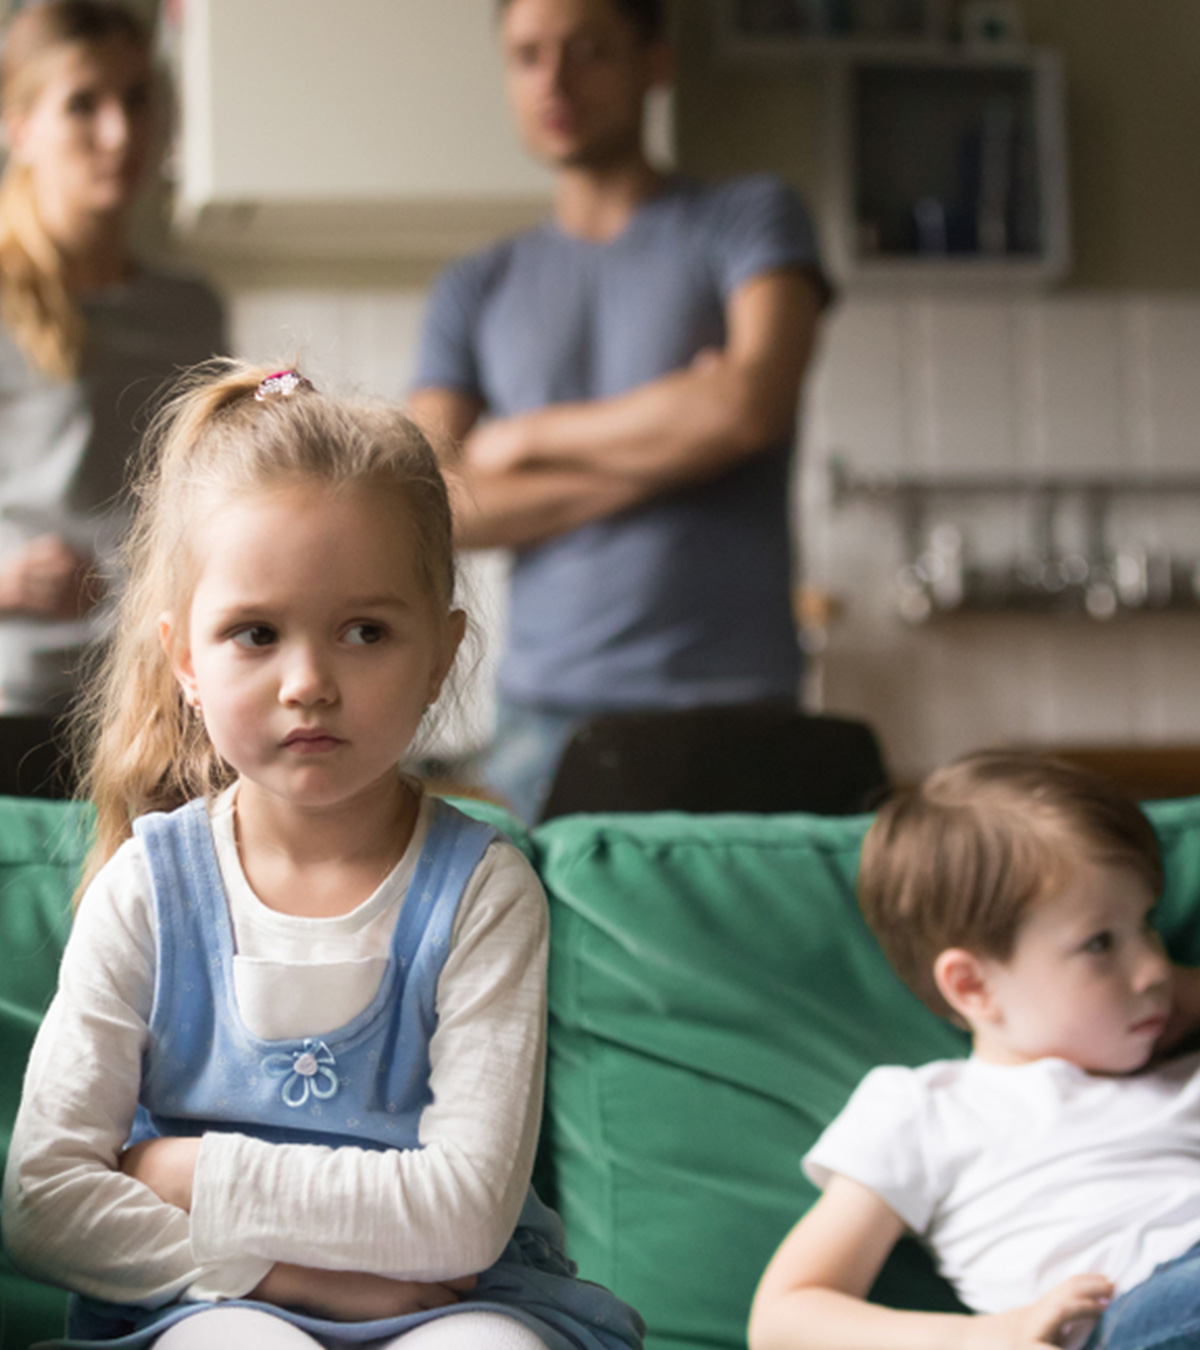 10 Signs Your Child Could Be In Trouble